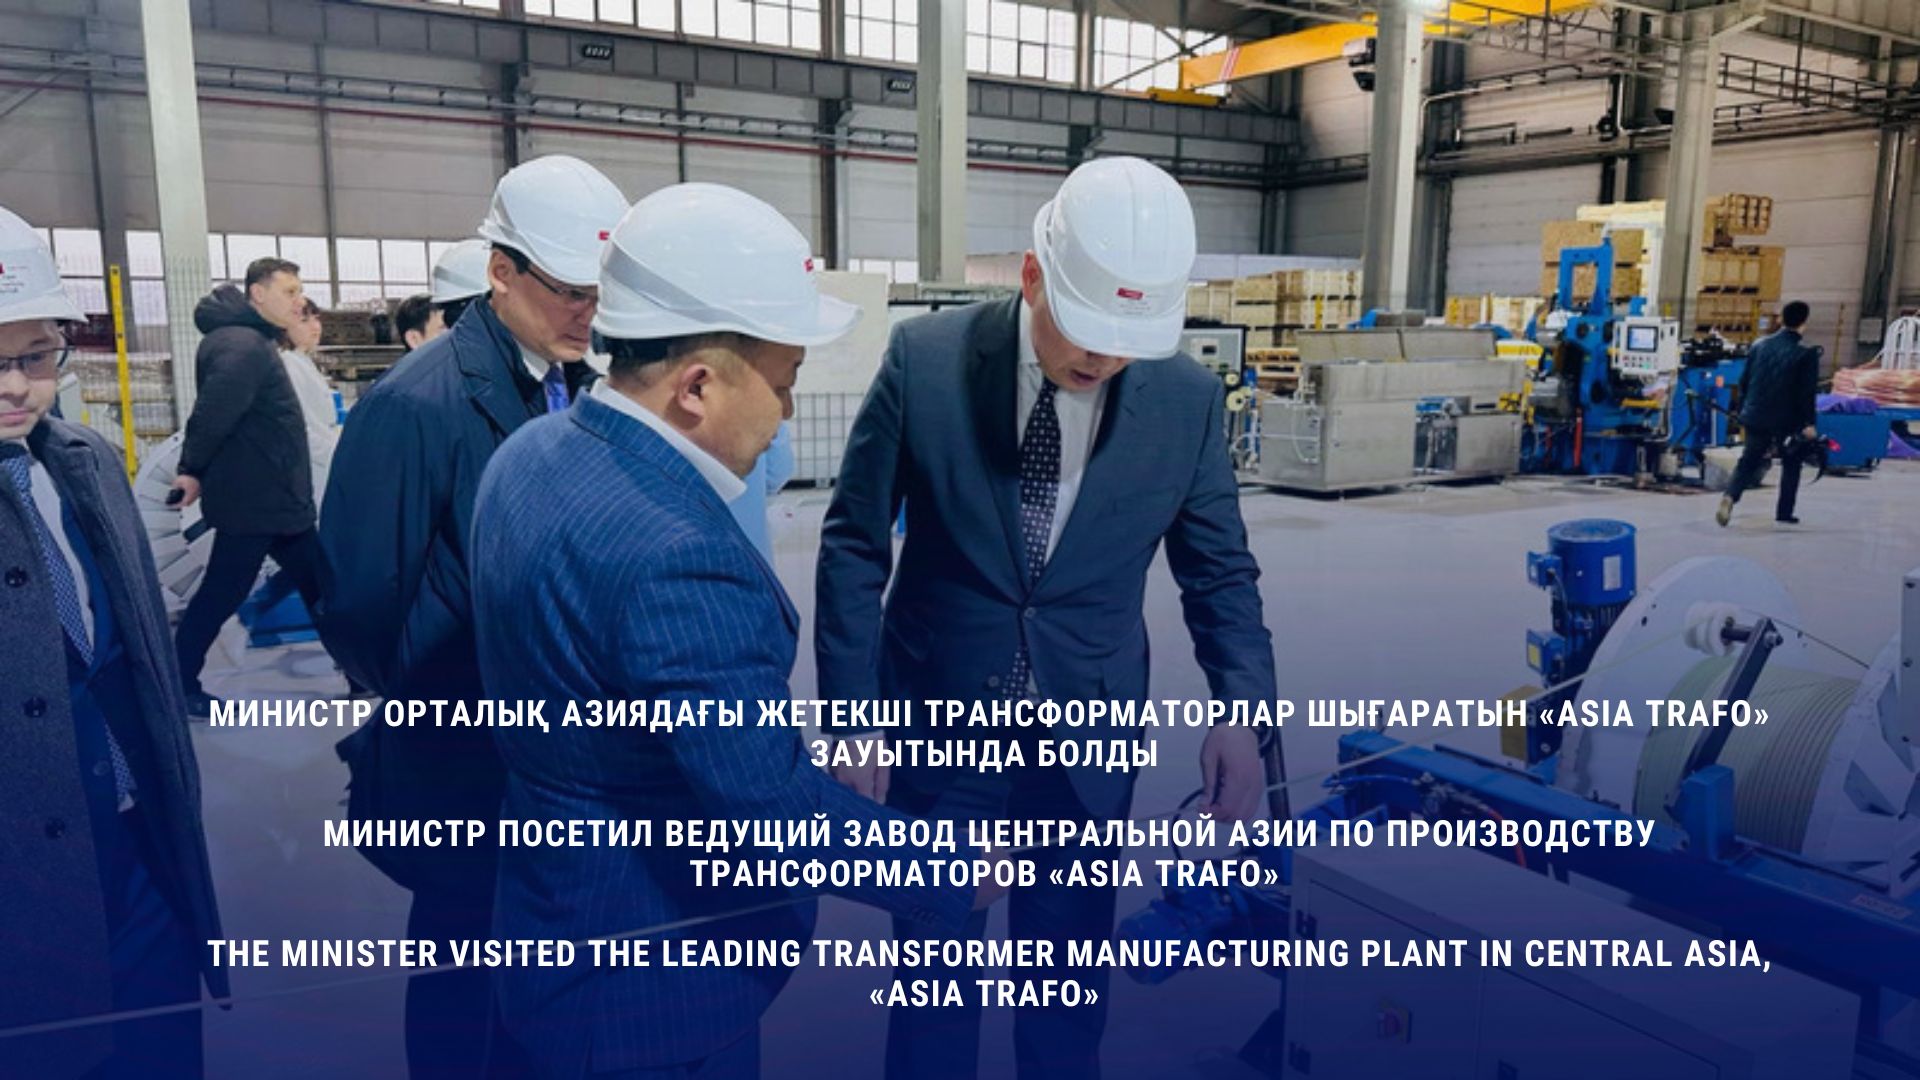 The Minister visited the leading transformer manufacturing plant in Central Asia, «Asia Trafo»